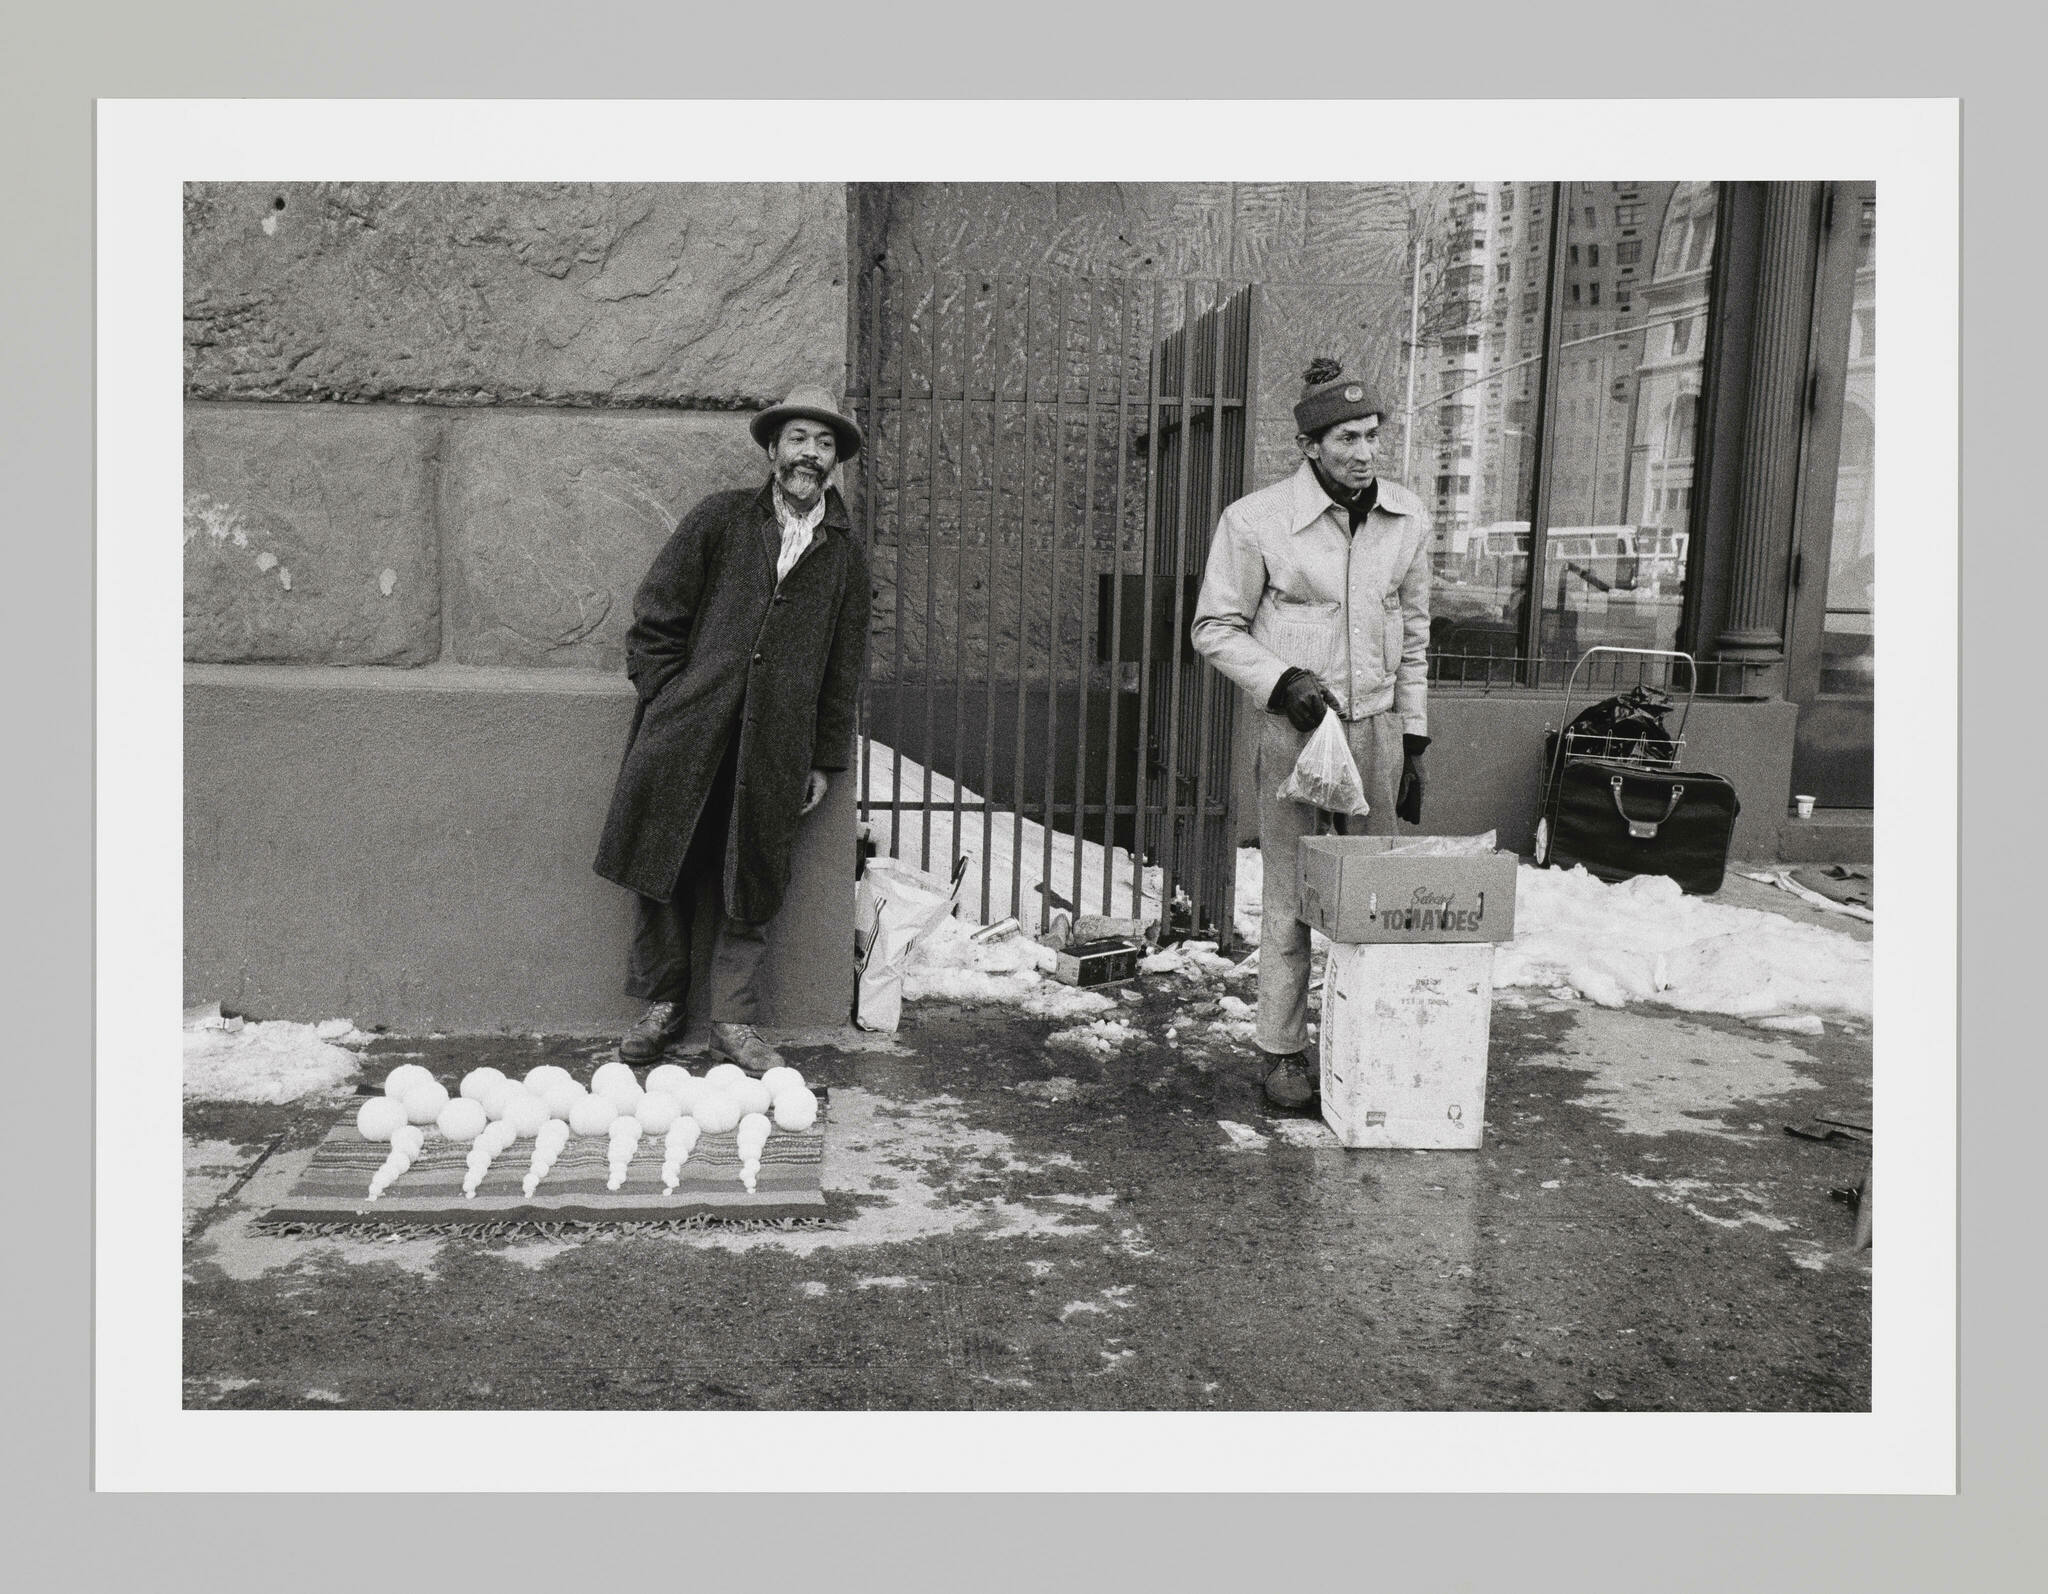 David Hammons, a bearded Black man in a long coat and fedora, stands behind a blanket displaying snowballs organized by size. A person with light skin in a beanie and jacket stands nearby behind stacked boxes.